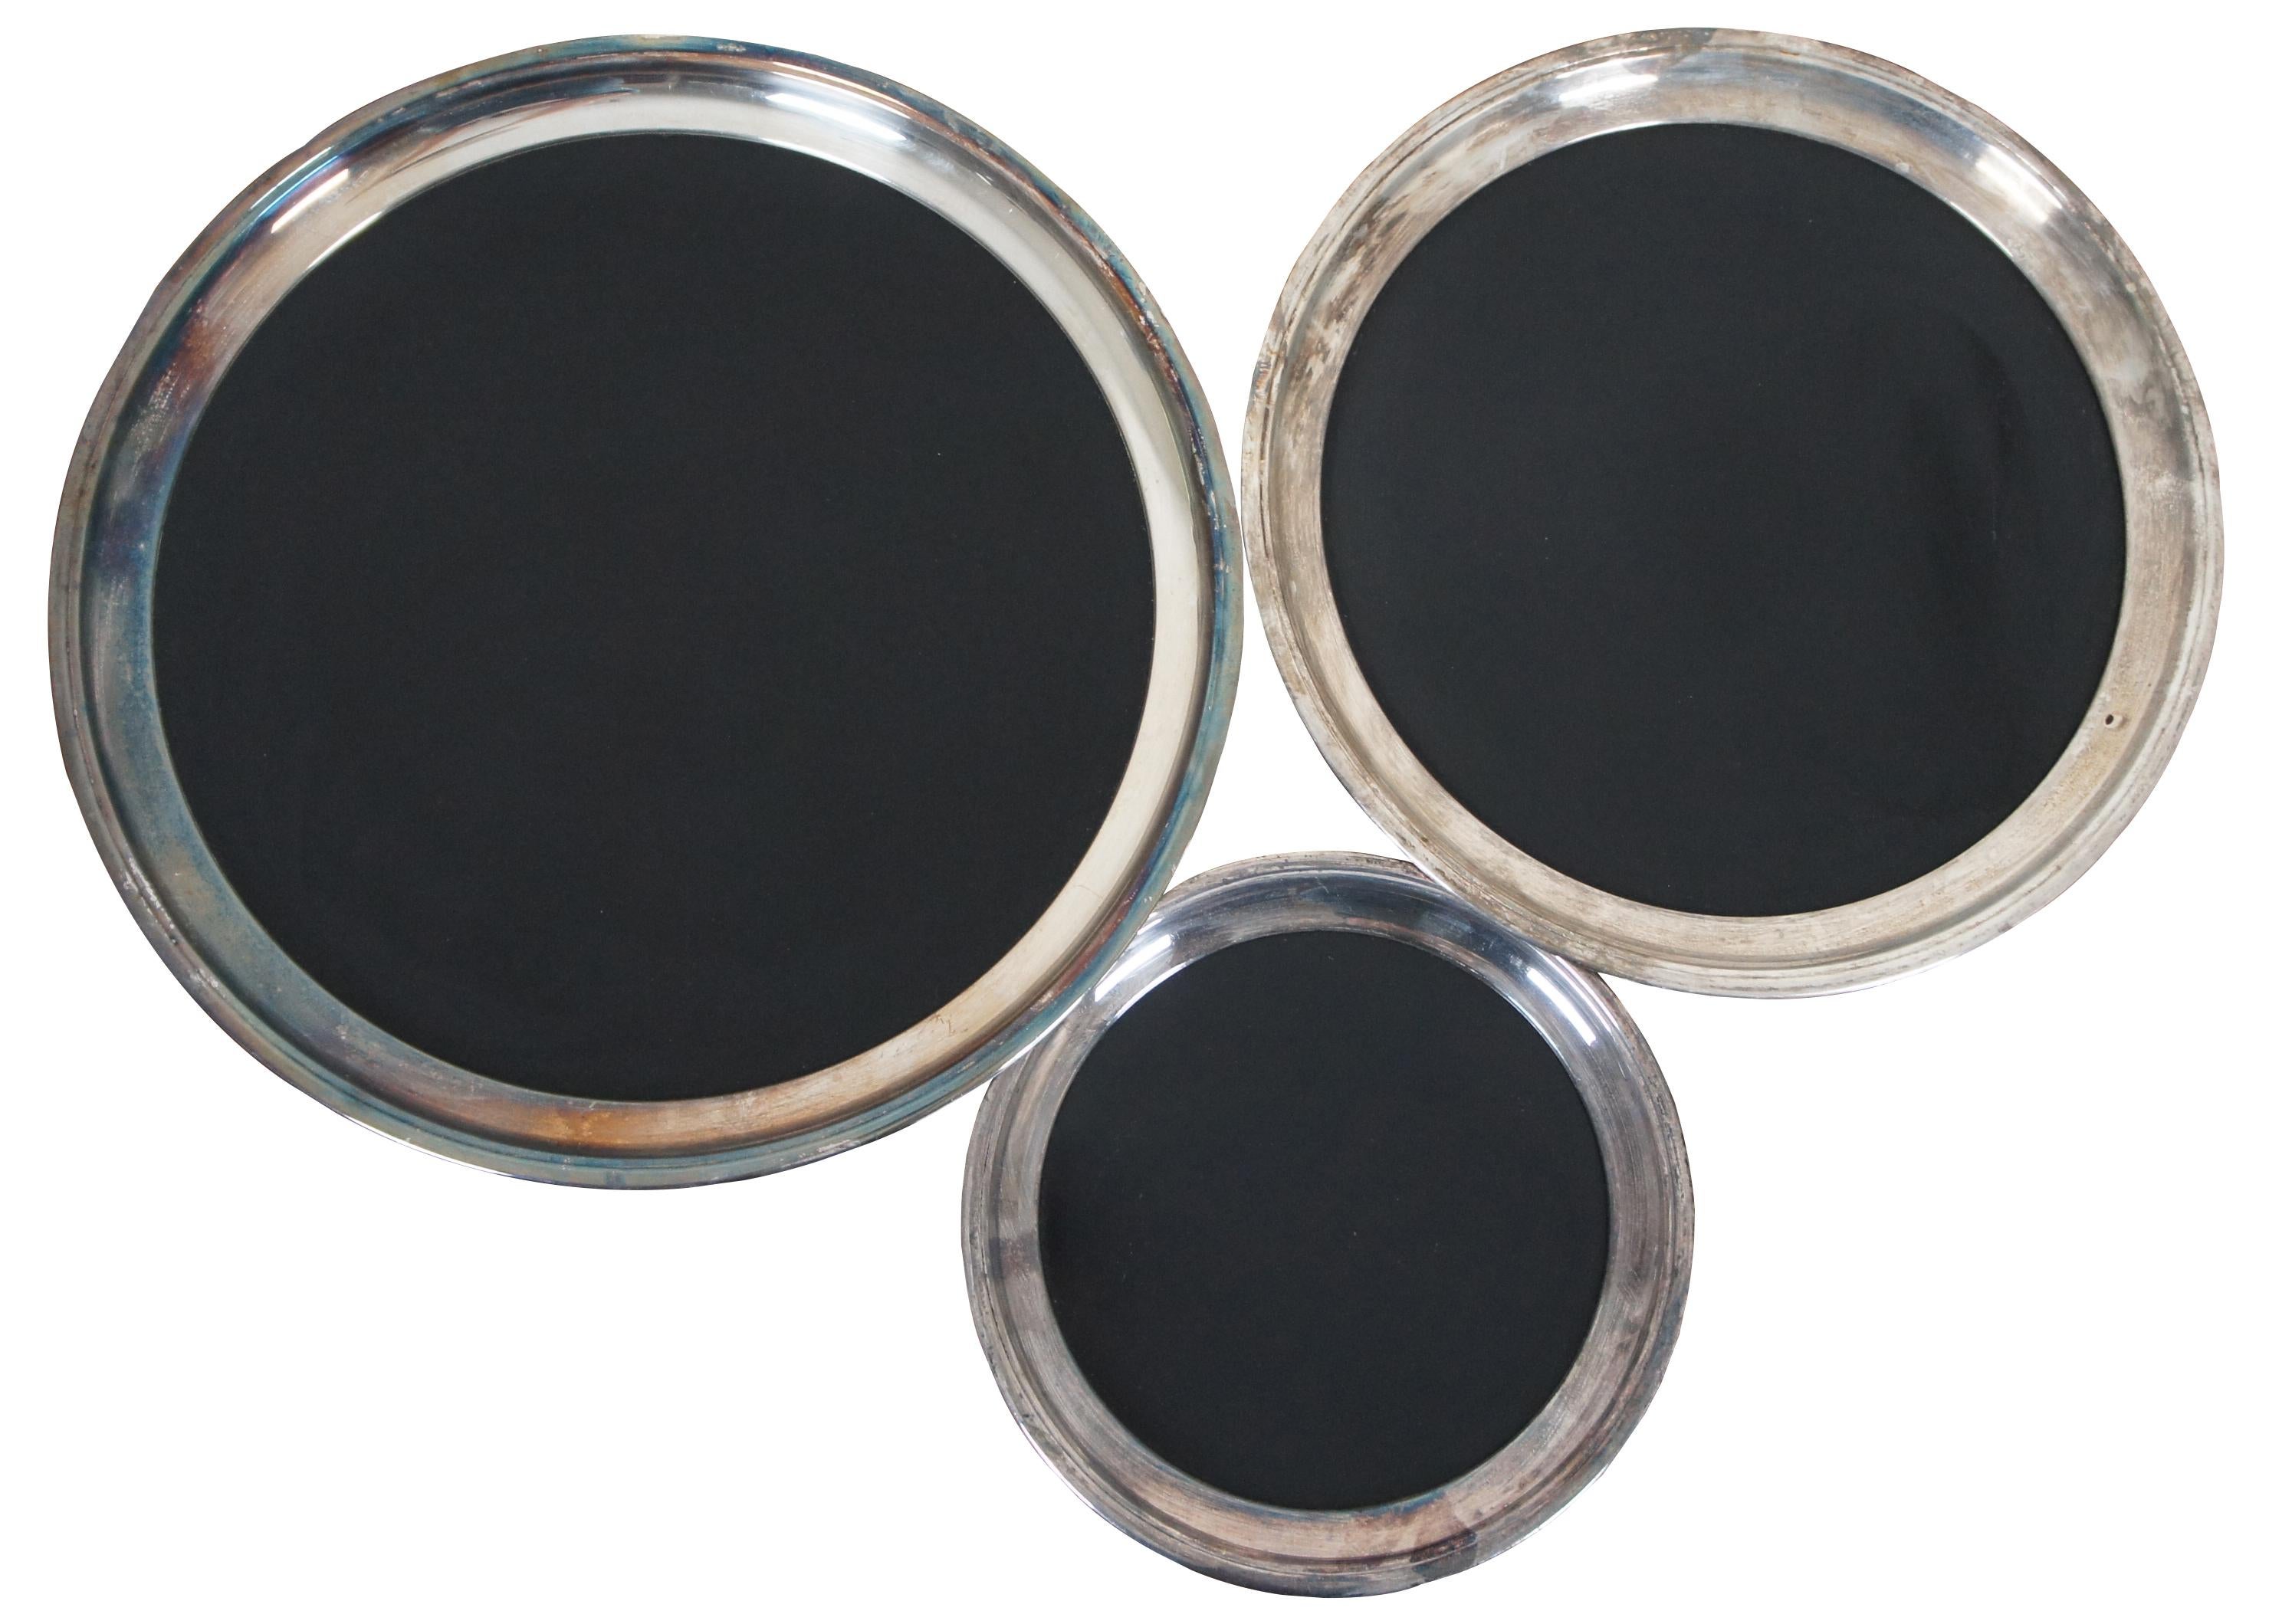 Set of three mid century Crescent silver plate and black Formica round serving trays.

Large - 16.5” x 1” / Medium - 14.25” x 1” / Small - 10” x 0.75” (Diameter x Height).